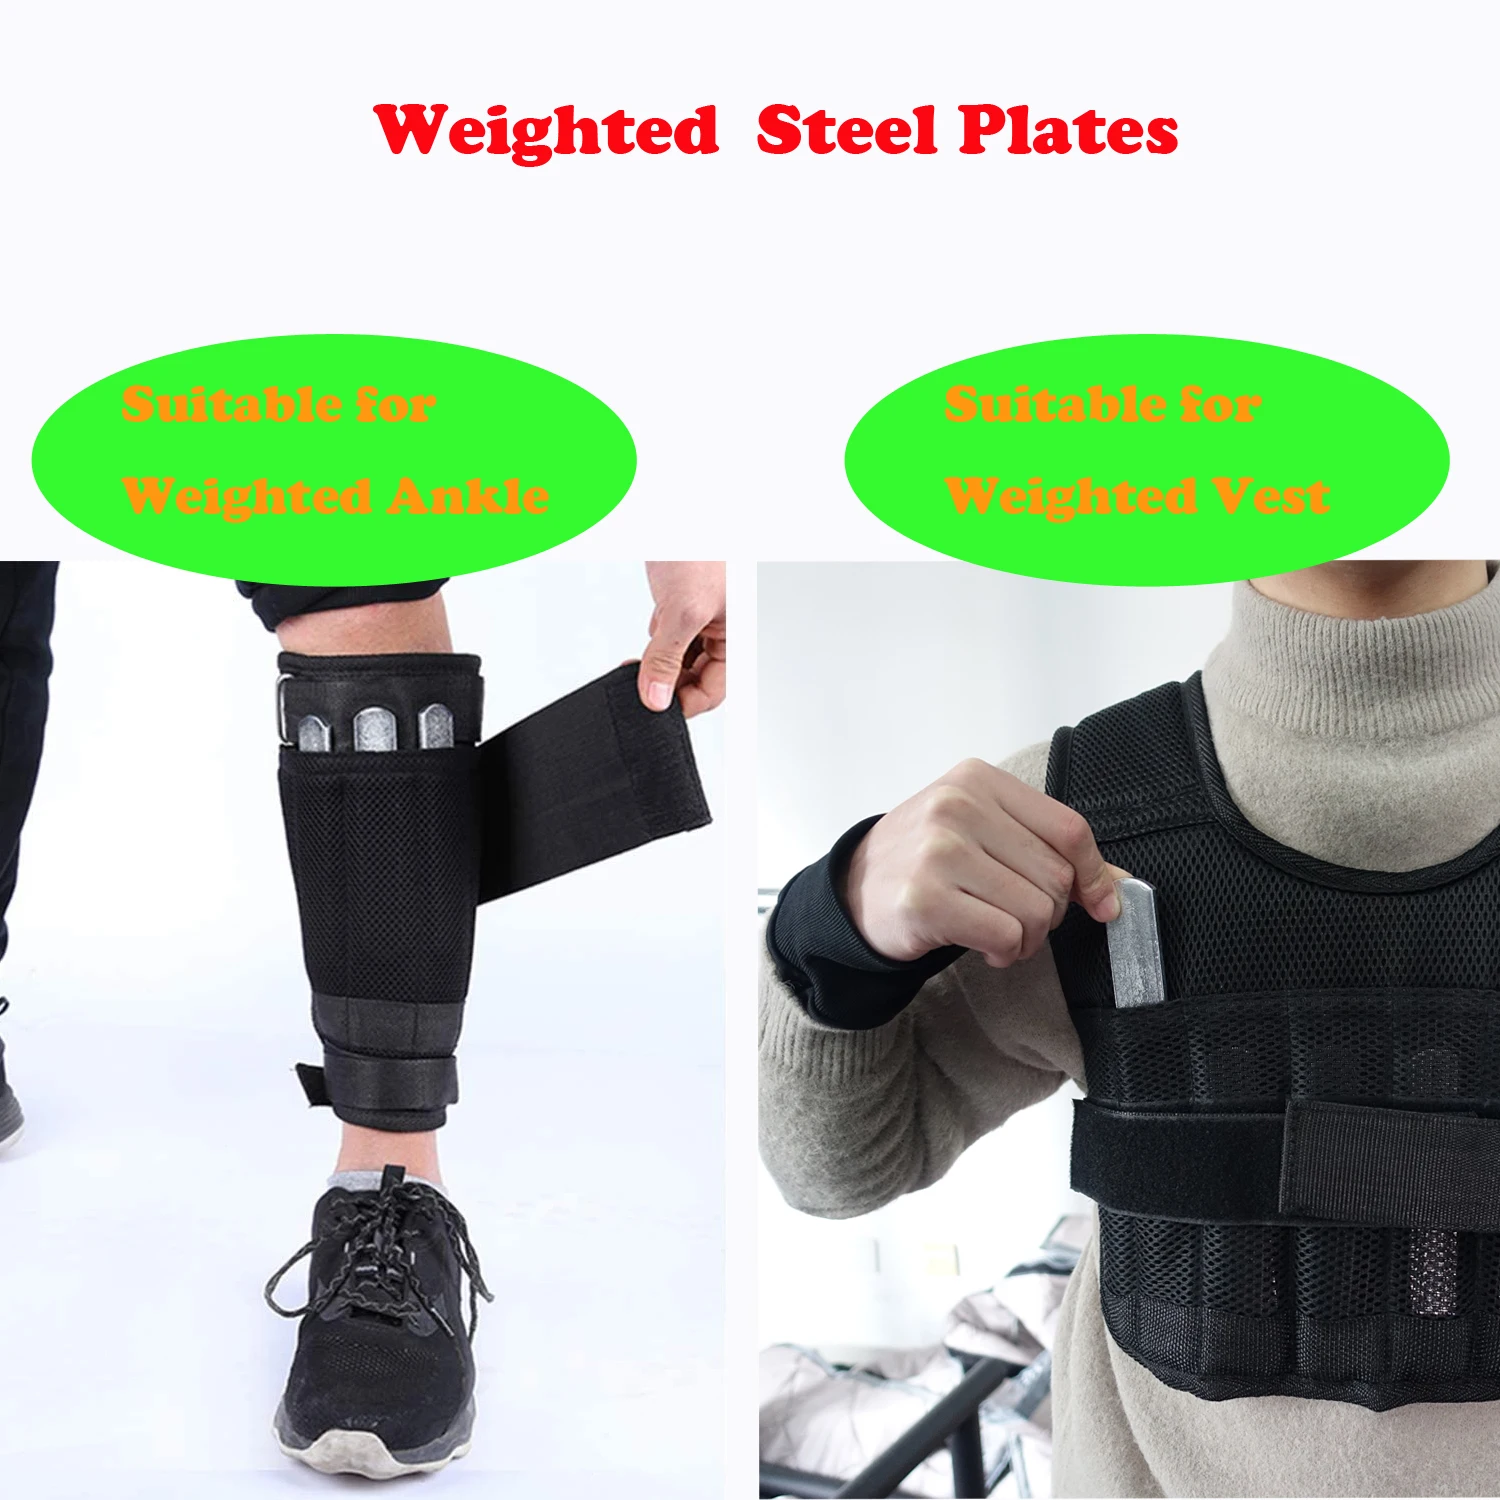 Weight Steel Plate Load-Bearing Adjustable Training Accessories For Weighted Vest Ankle Leg Sport Strength Fitness Equipment